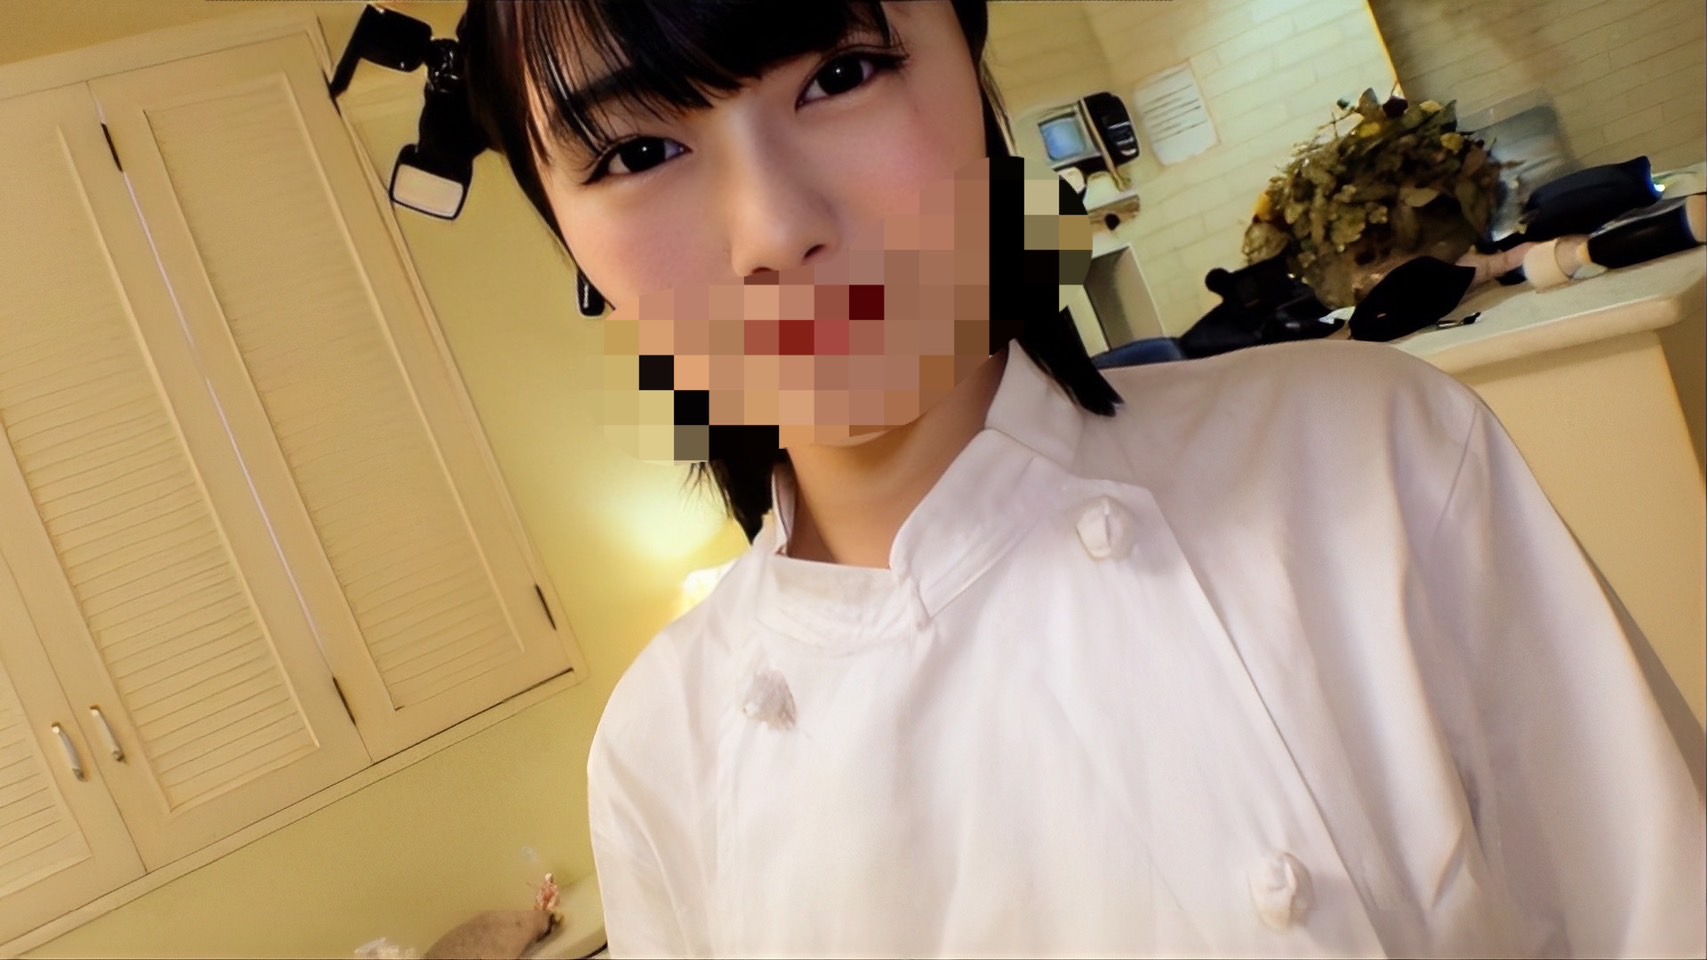 FC2PPV 3252039 3 Shots With A Cute Pastry Chef. ≪Creampie / Gonzo / Beautiful Big Tits / Neatness≫ [cen]